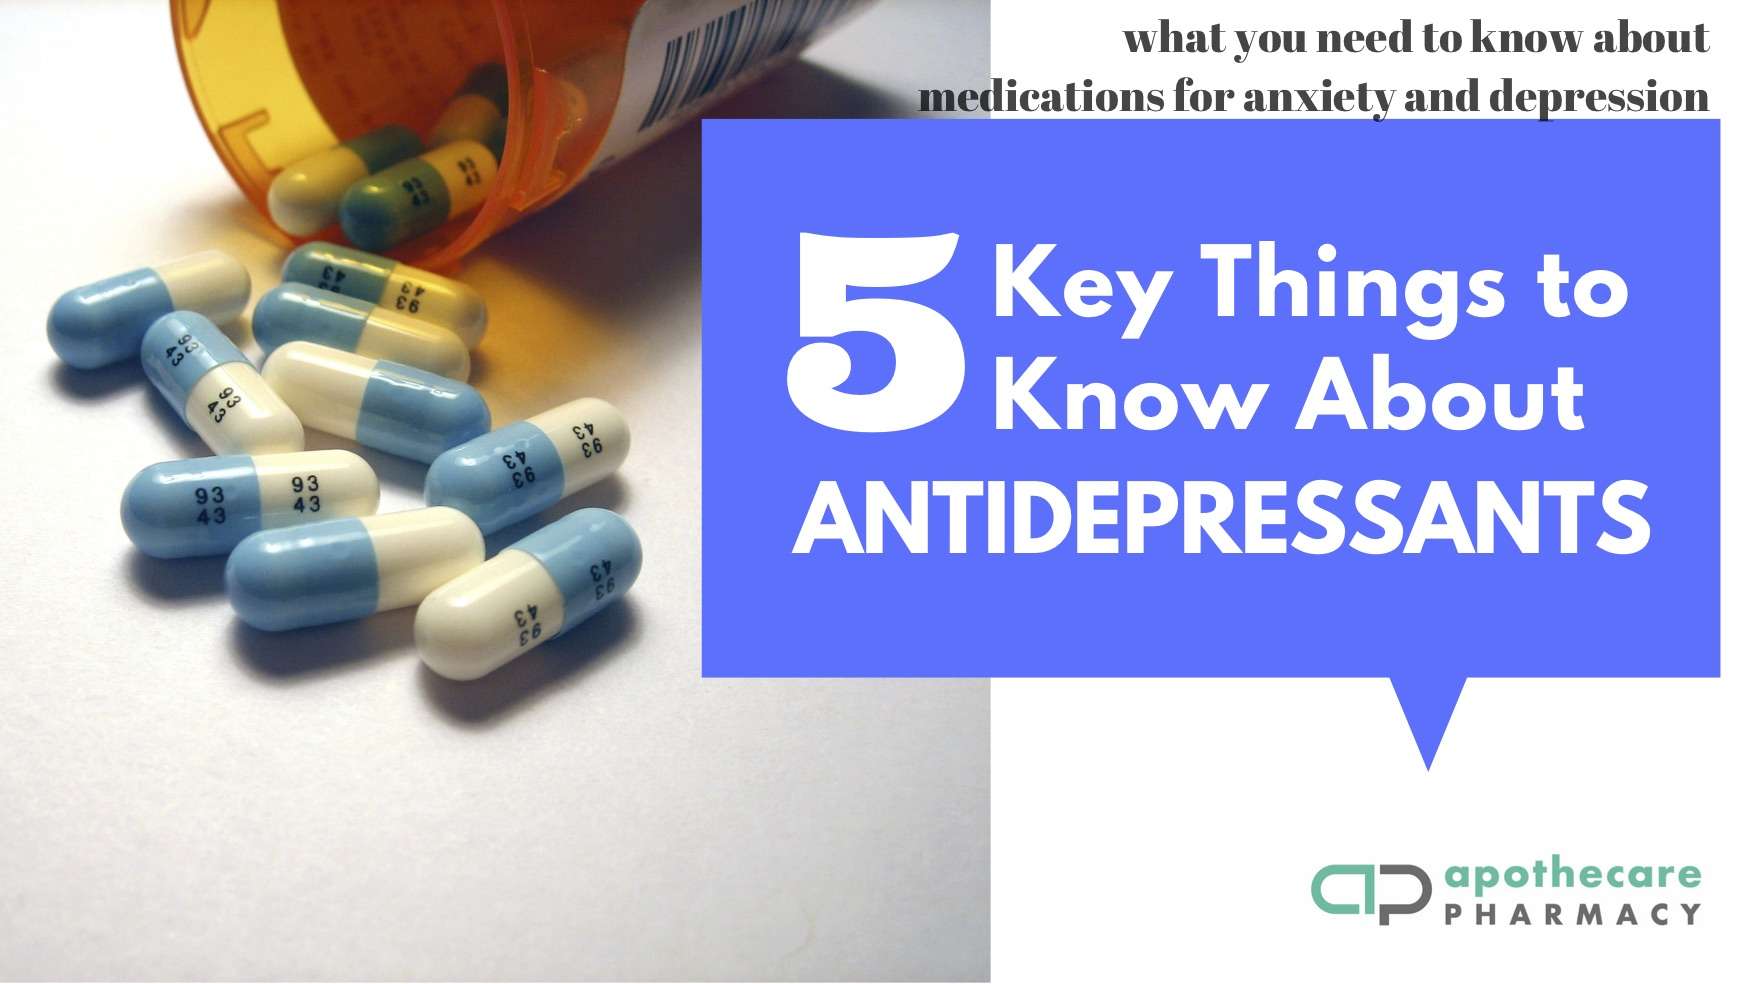 What You Need To Know About Medications Used For Anxiety And